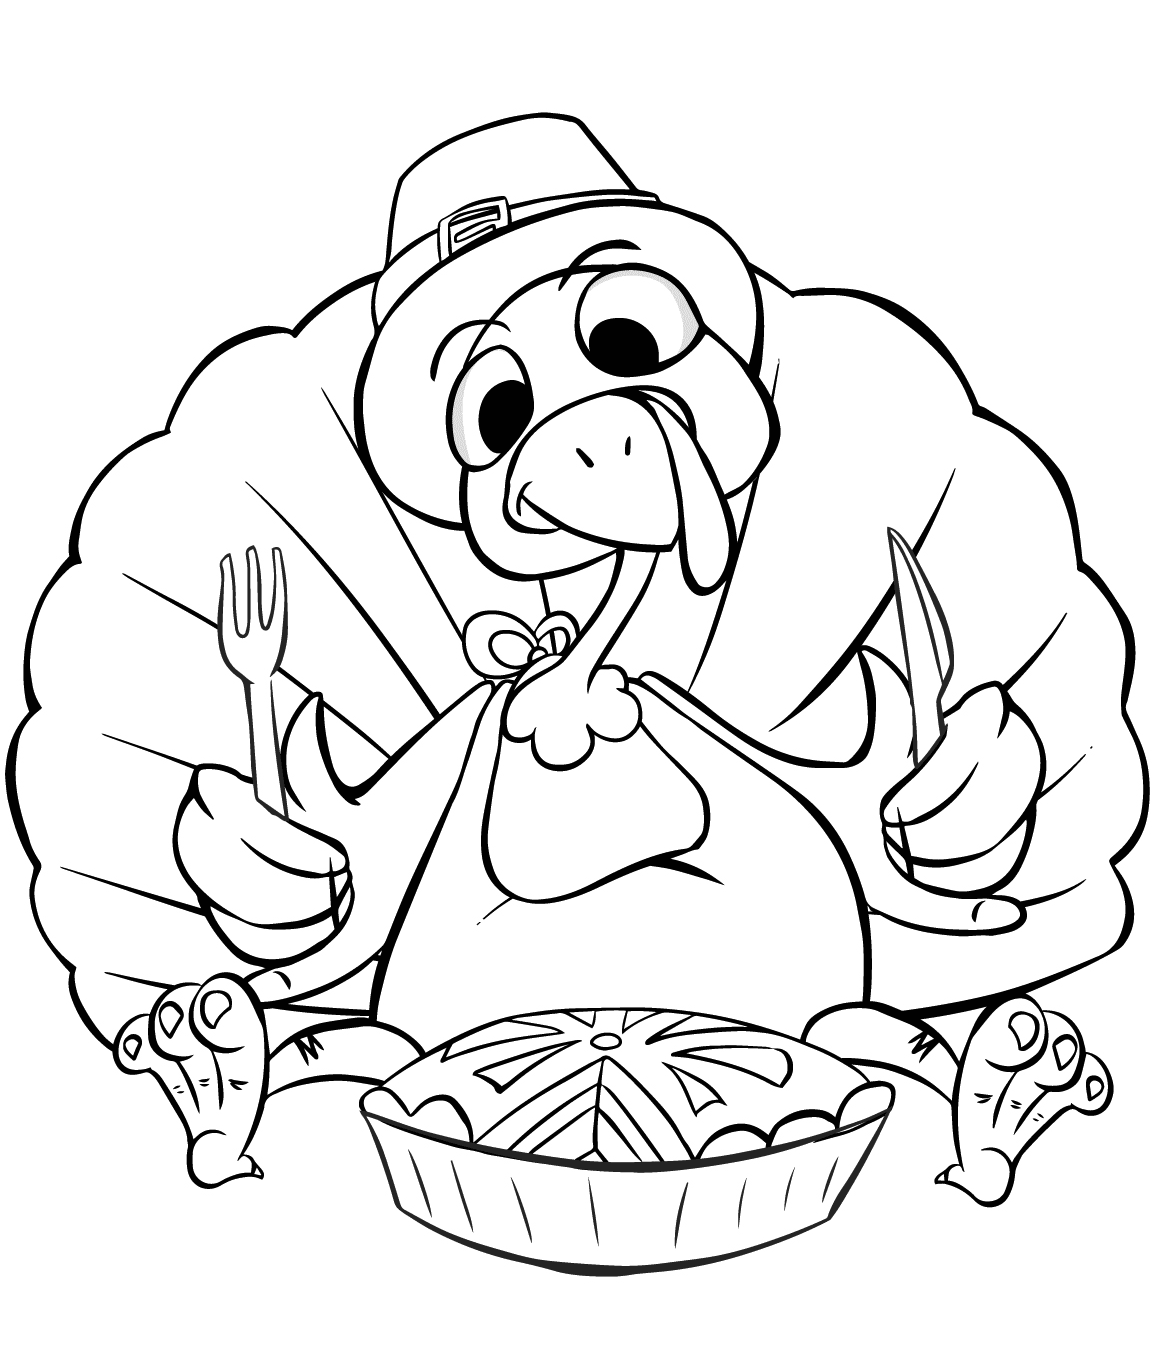 thanksgiving-coloring-pages-free-printable-turkey-coloring-pages-for